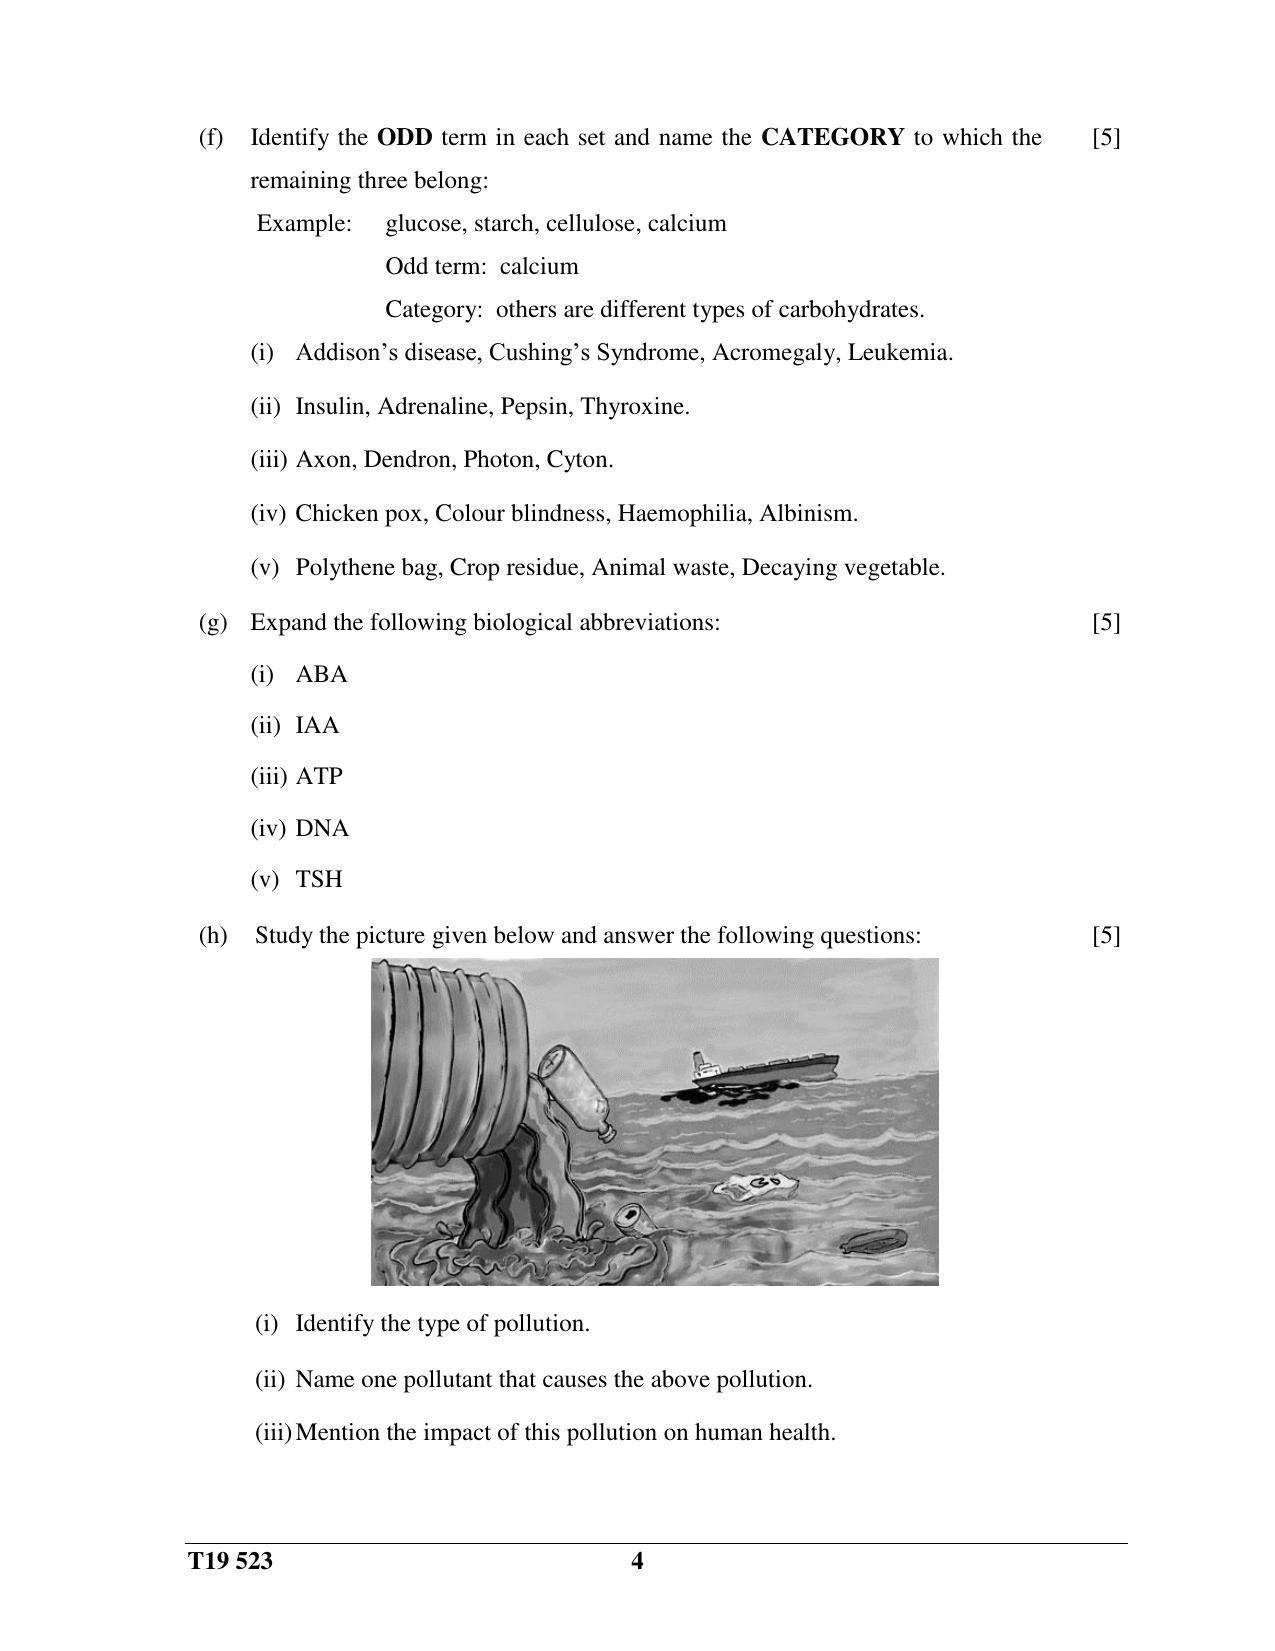 ICSE Class 10 Science Paper 3 (Biology) 2019 Question Paper - Page 4